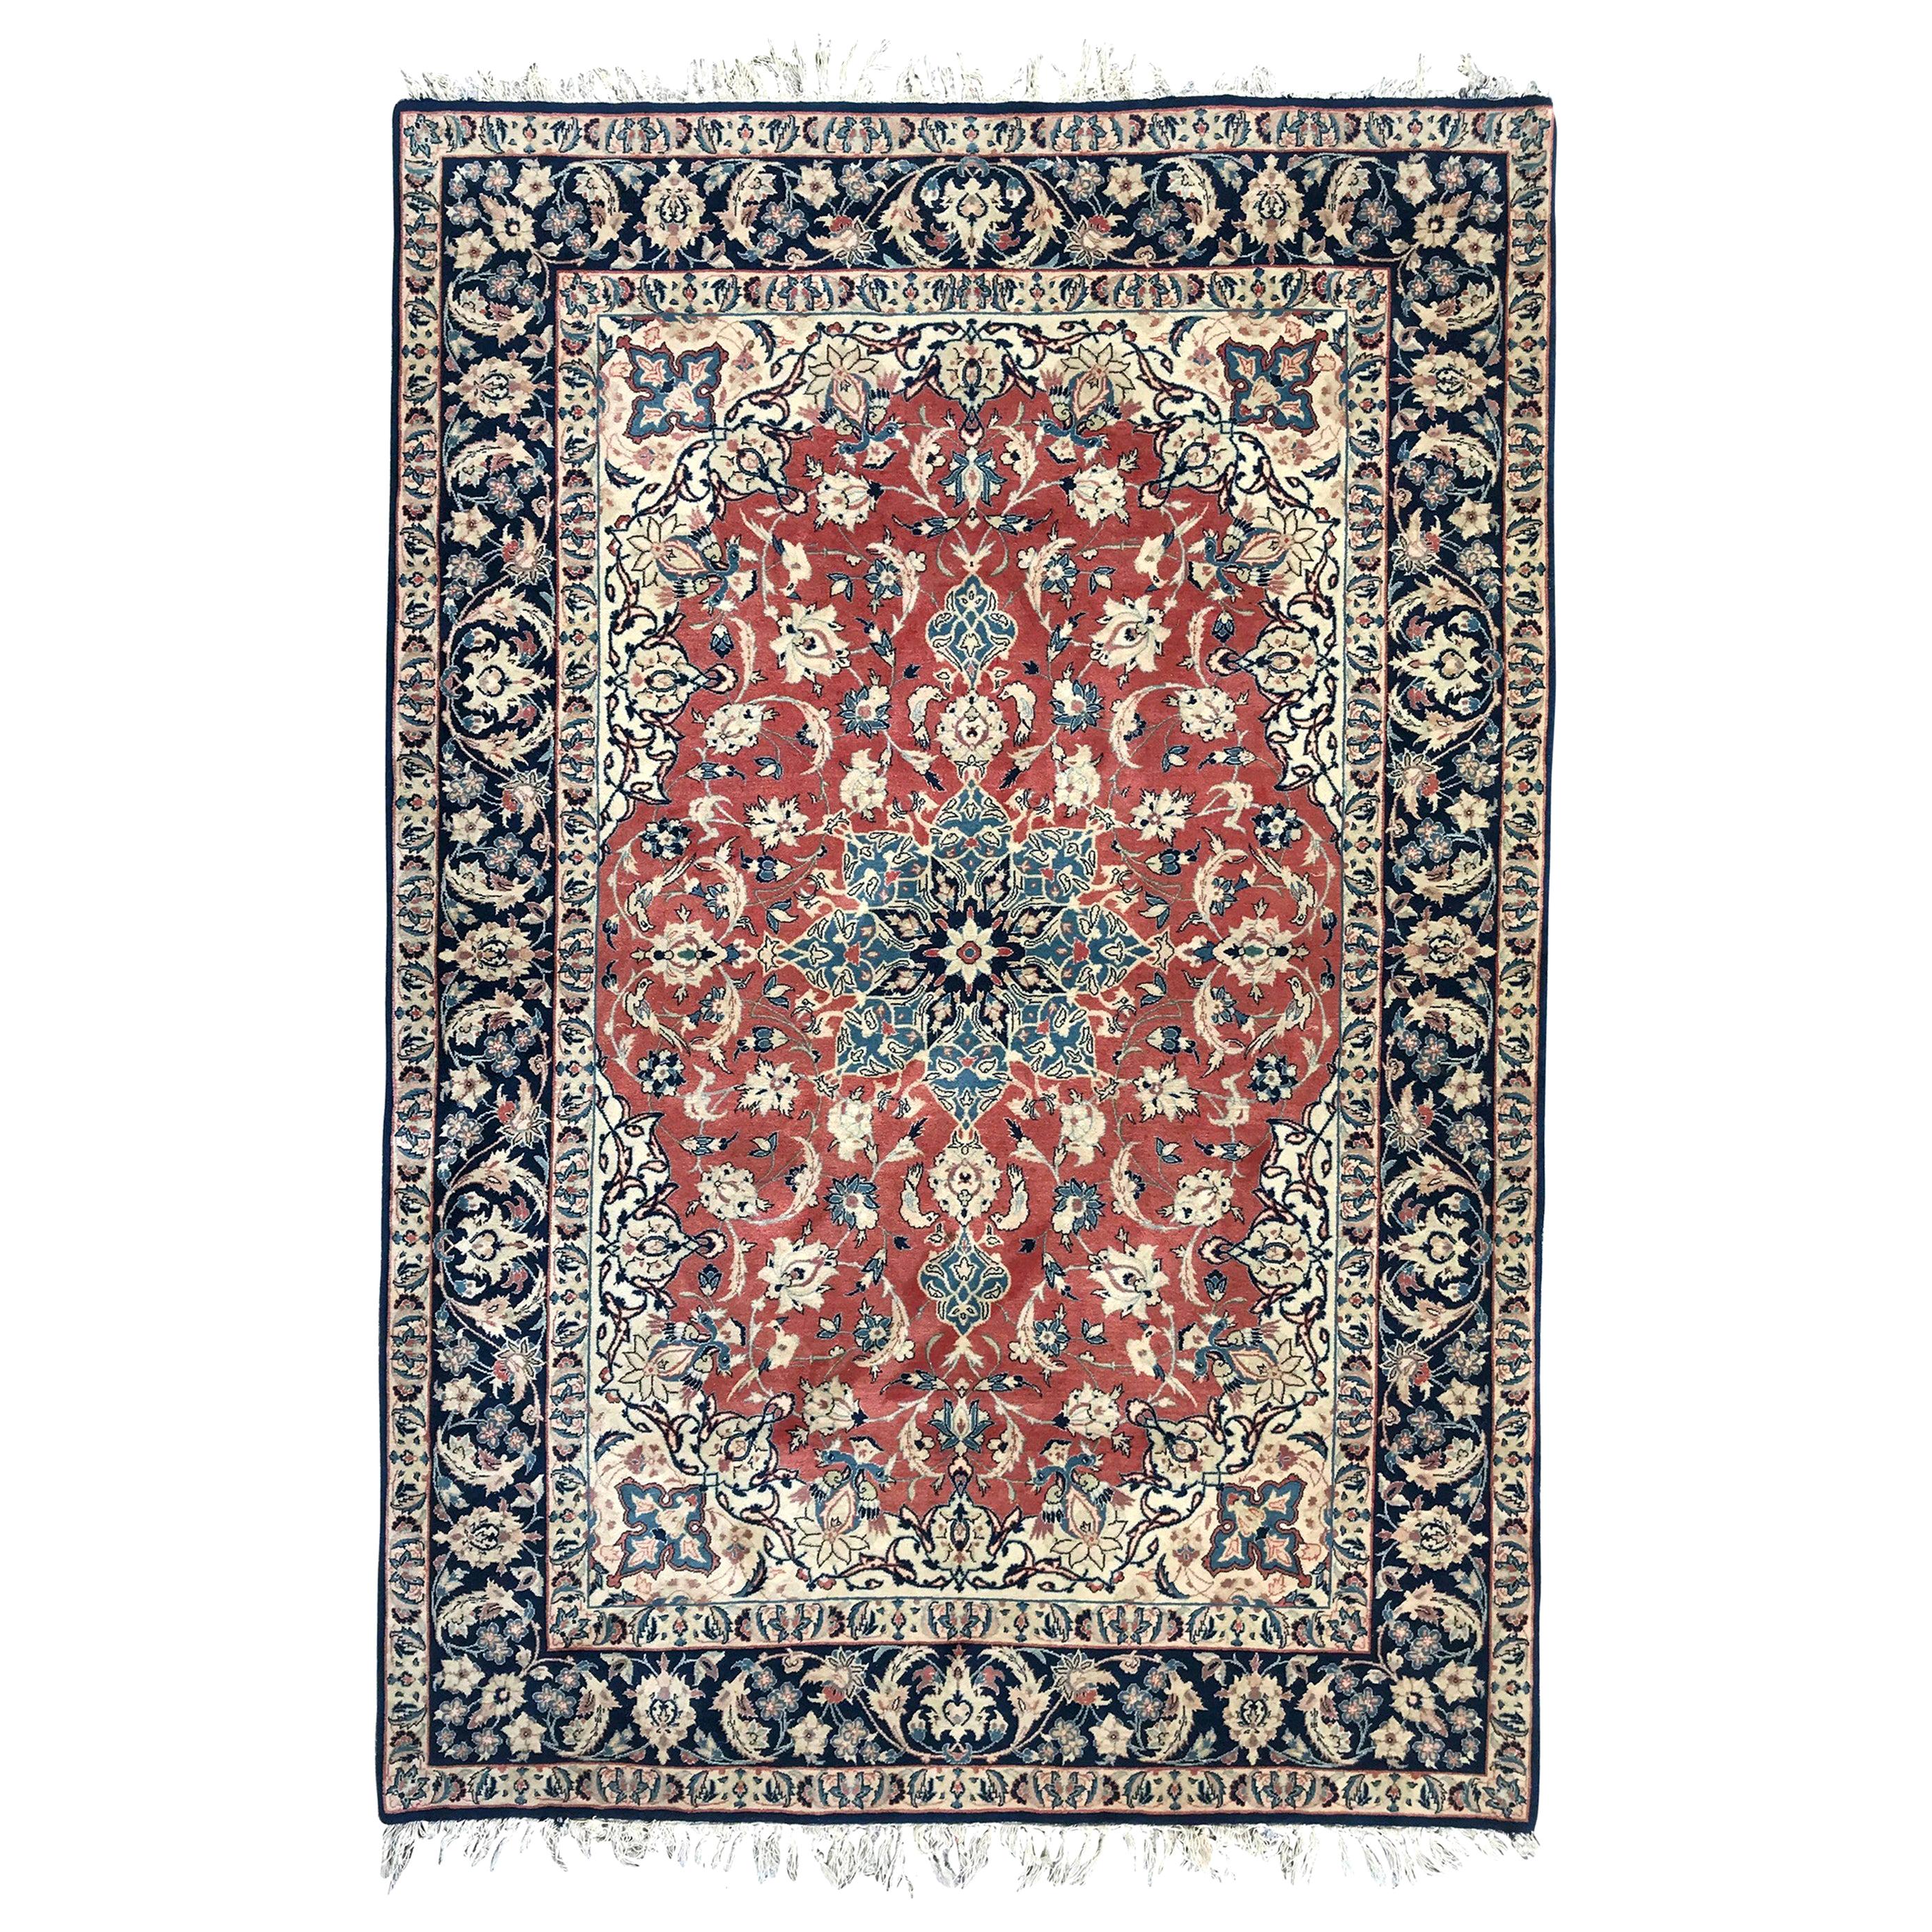 Bobyrug's Wonderful Very Fine Hand Knotted Isfahan Rug